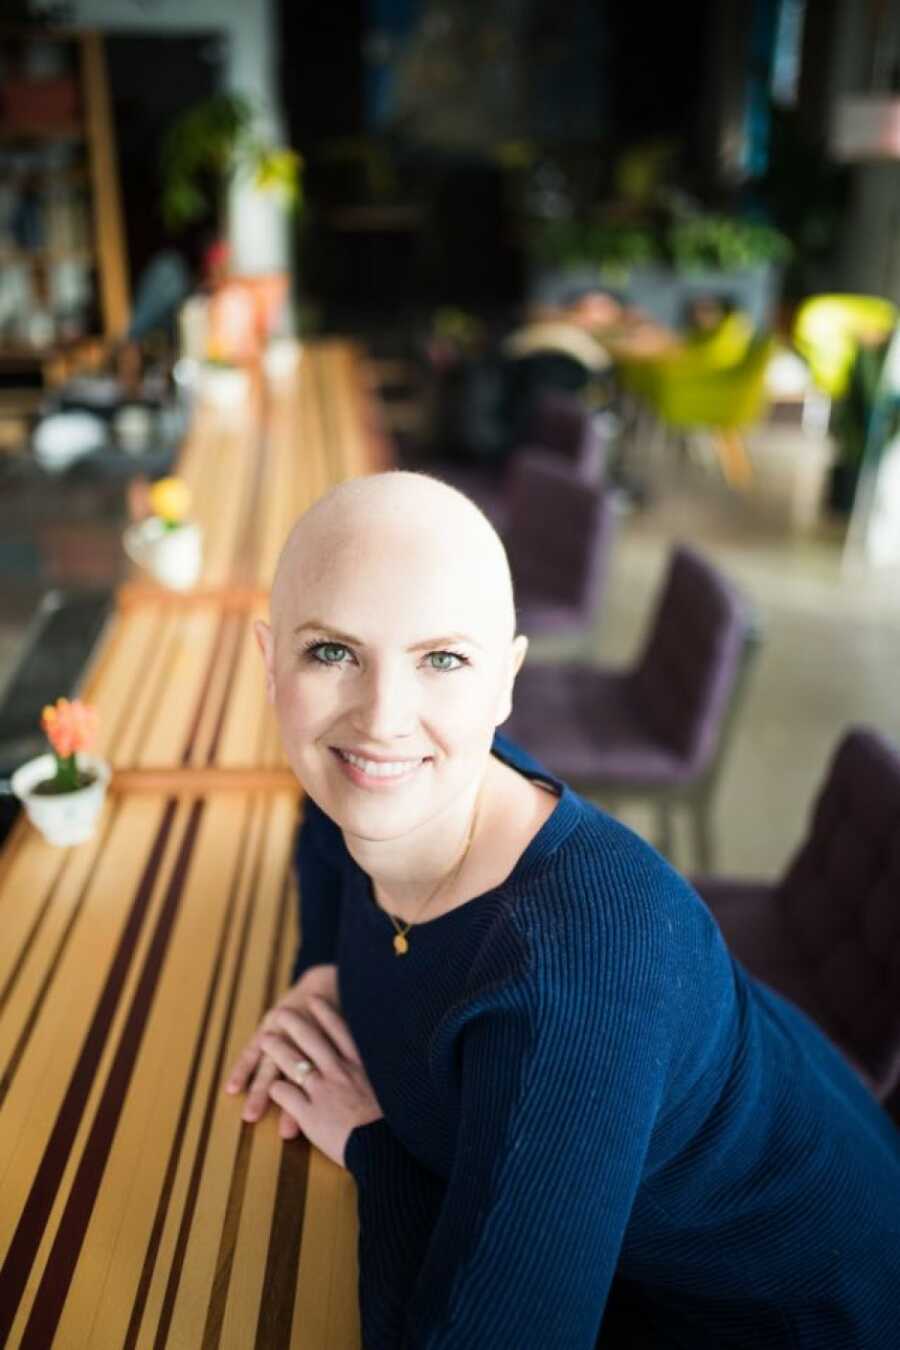 woman with cancer taking a head shot